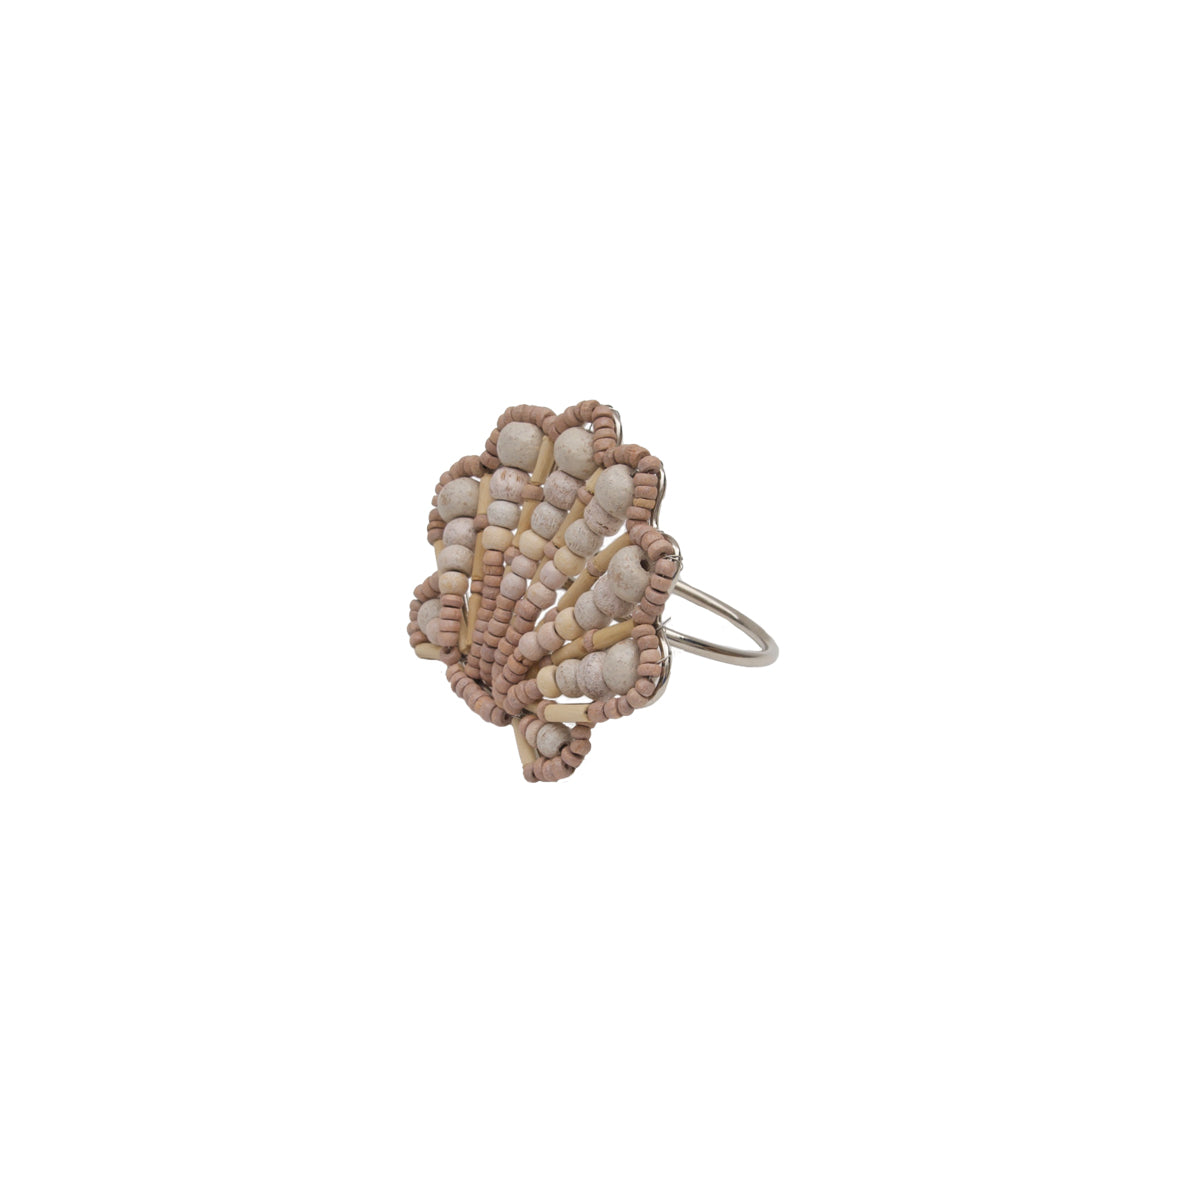 Scallop shell shaped napkin ring crafted of natural wooden beads and metal wire side view.